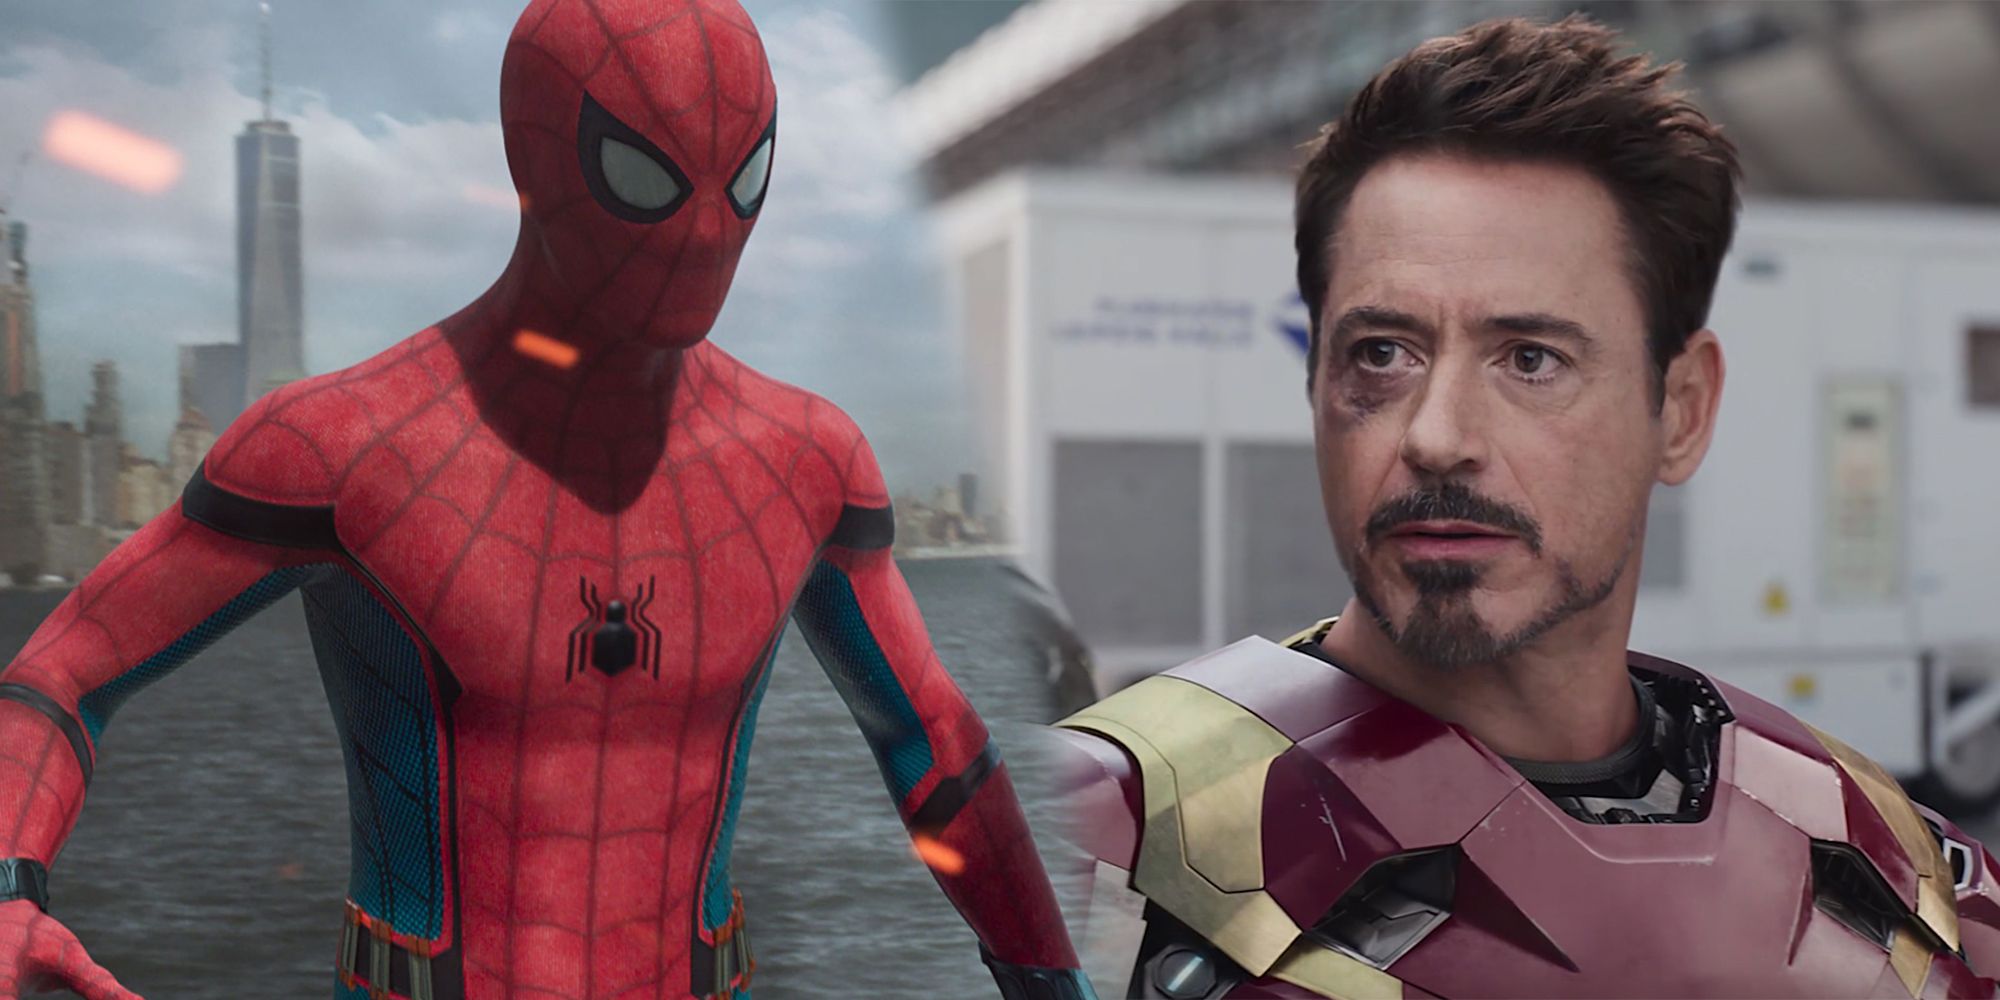 Spider-Man and Iron Man in the MCU.